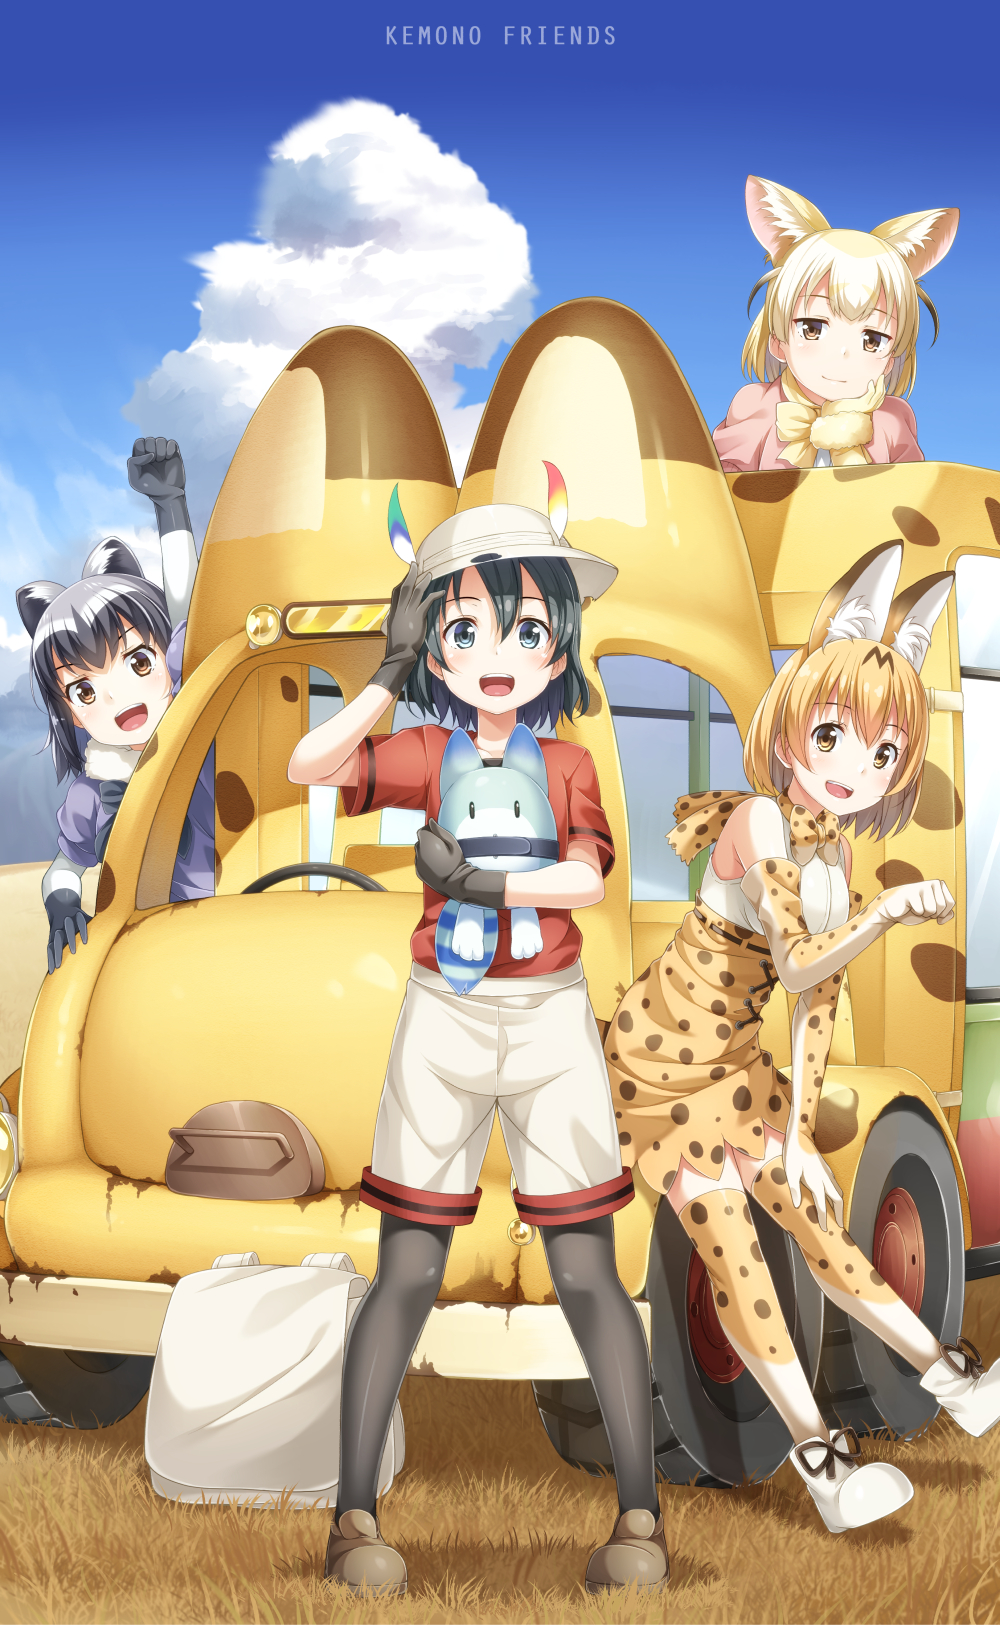 4girls :d animal_ears backpack backpack_removed bag bare_shoulders beige_shorts black_gloves black_hair black_legwear blonde_hair blue_eyes blue_shirt blush boots bow bowtie brown_eyes brown_shoes bucket_hat chin_rest clenched_hand clouds collarbone common_raccoon_(kemono_friends) copyright_name day elbow_gloves fennec_(kemono_friends) fox_ears full_body gloves grass hair_between_eyes hand_on_own_thigh hat hat_feather head_tilt high-waist_skirt highres holding japari_bus kaban_(kemono_friends) kemono_friends legs_apart light_smile looking_at_viewer lucky_beast_(kemono_friends) multicolored_hair multiple_girls open_mouth outdoors pantyhose paw_pose pink_sweater raccoon_ears raised_fist red_shirt romaji serval_(kemono_friends) serval_ears serval_print shadow shirt shoes short_hair short_sleeves silver_hair skirt sky sleeveless sleeveless_shirt smile standing sweater thigh-highs two-tone_hair white_boots white_hair white_shirt yellow_bow yellow_bowtie yuuri_nayuta